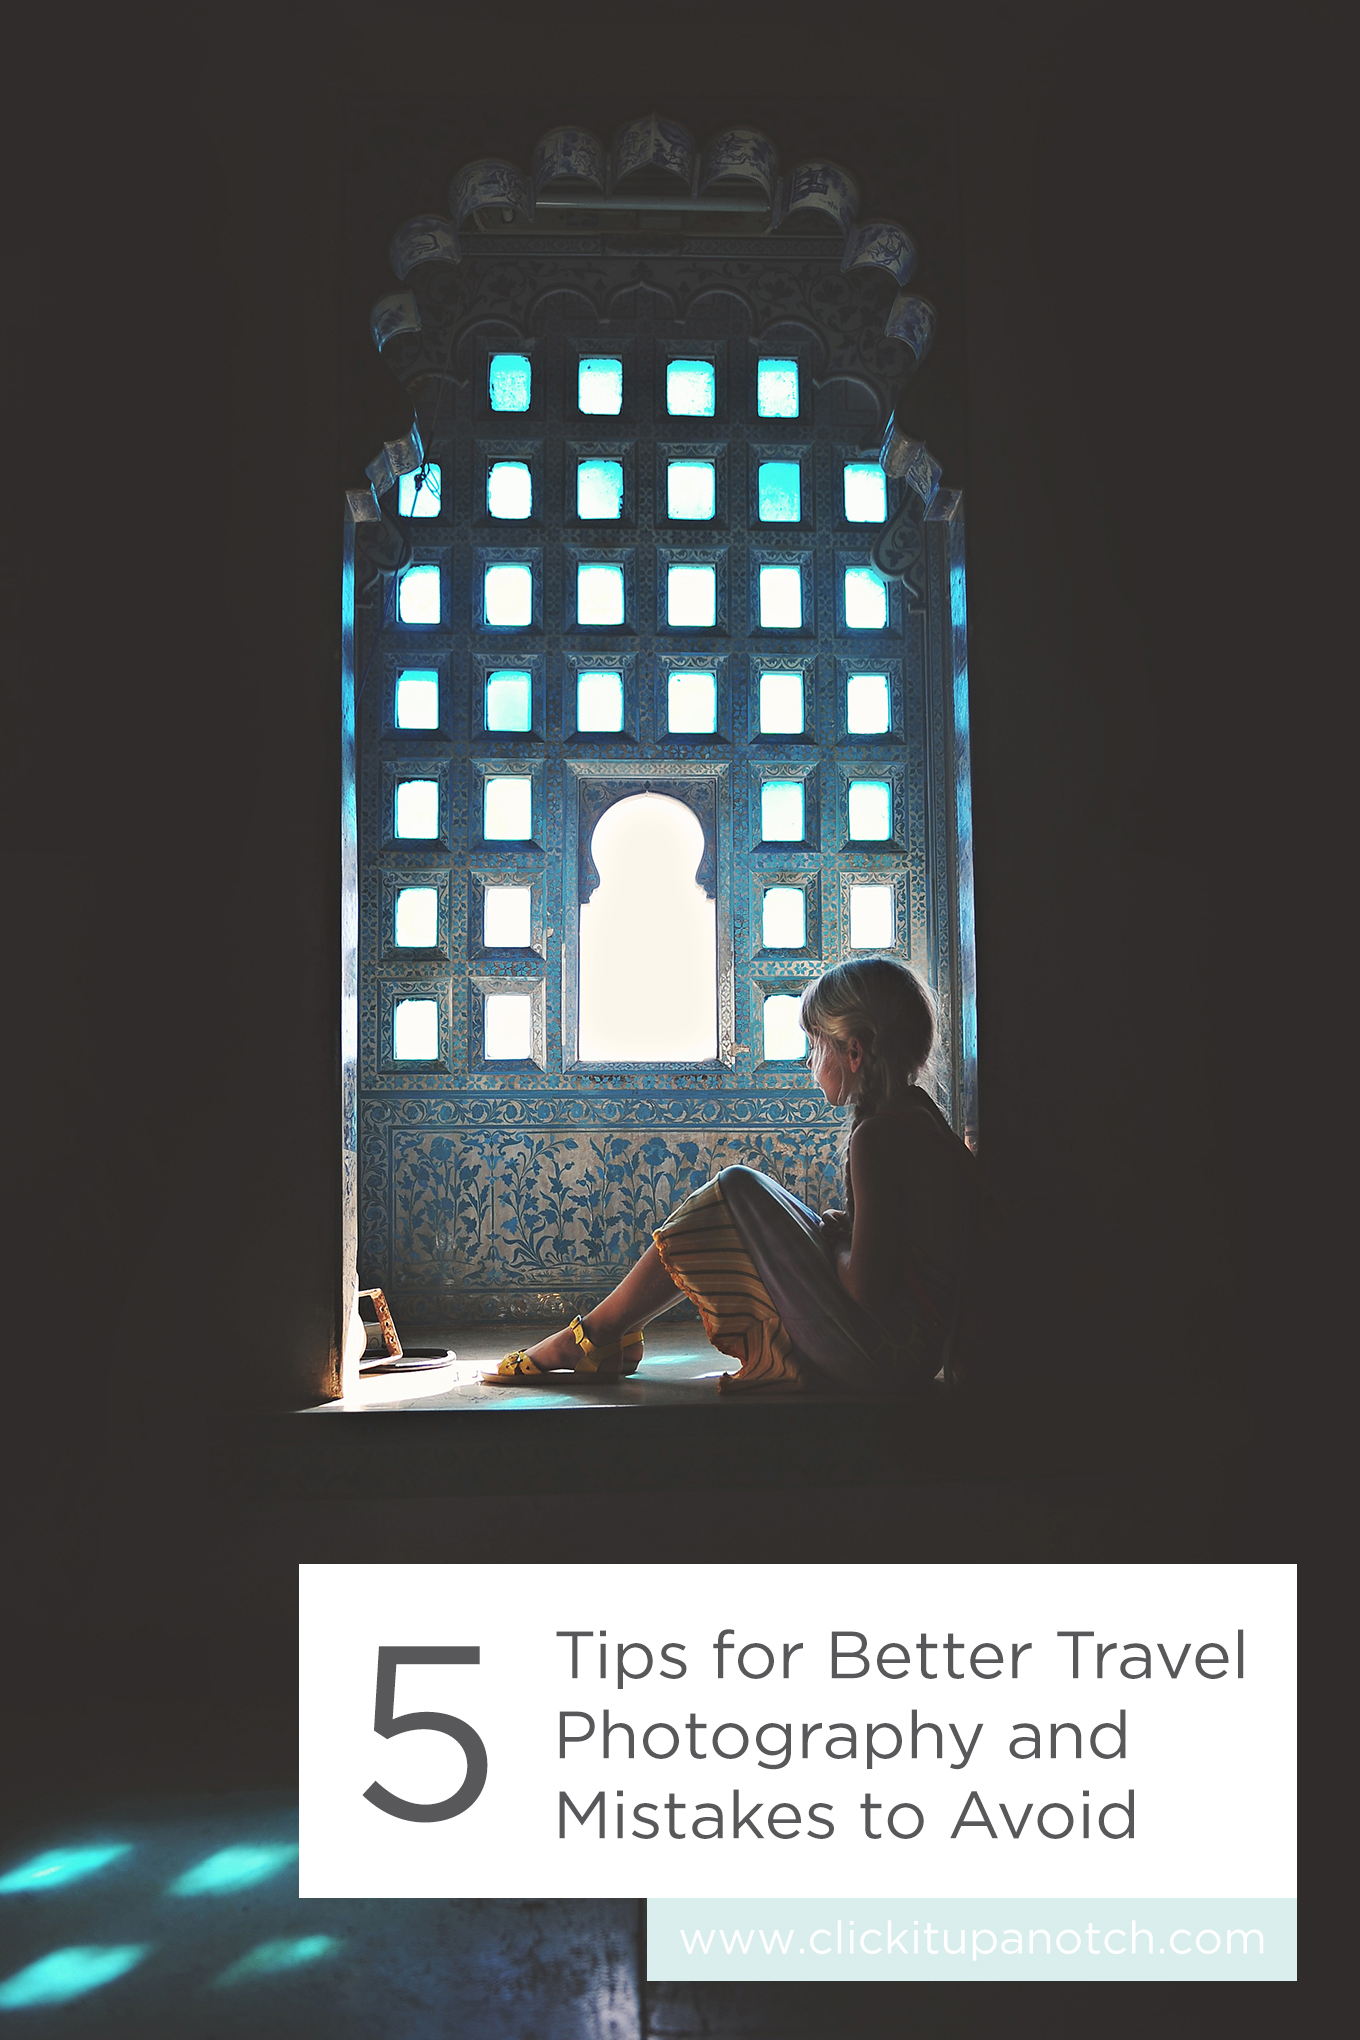 These tips are going to come in handy on our family trip! I love that she added her own mistakes to avoid. Read - "5 Tips for Better Travel Photography and Mistakes to Avoid"